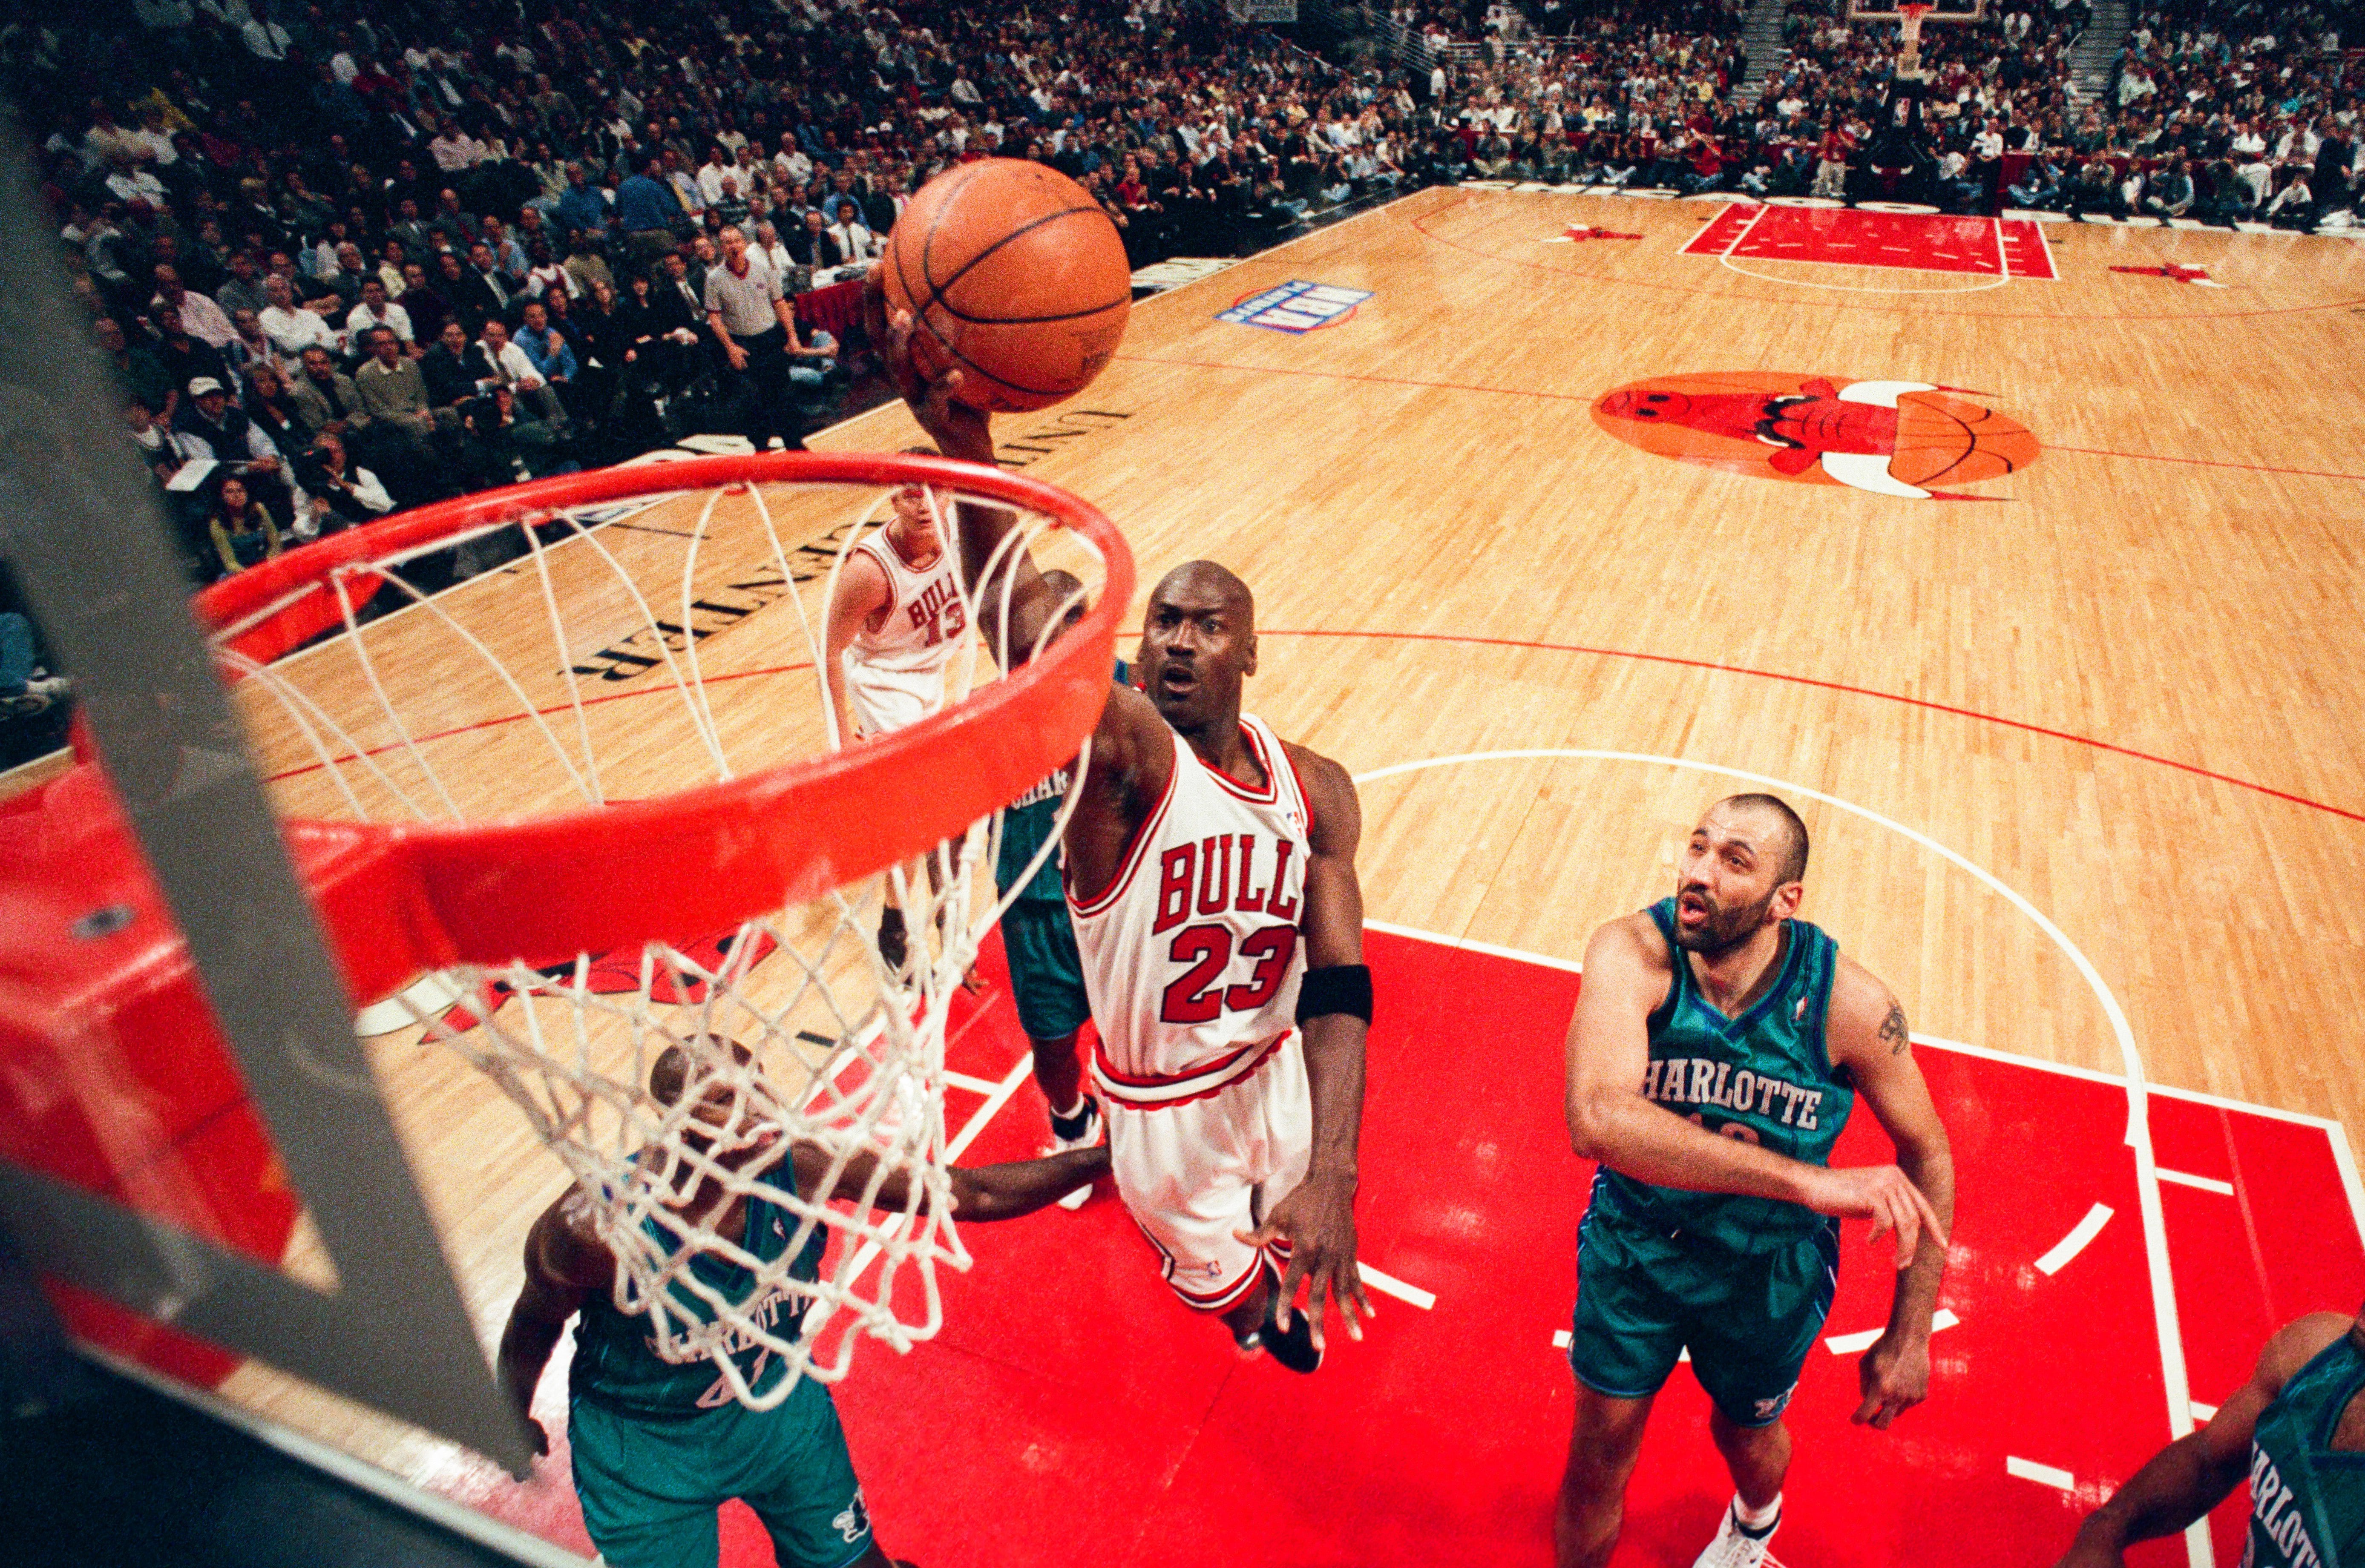 For Michael Jordan, hitting was hard, but a major challenge in